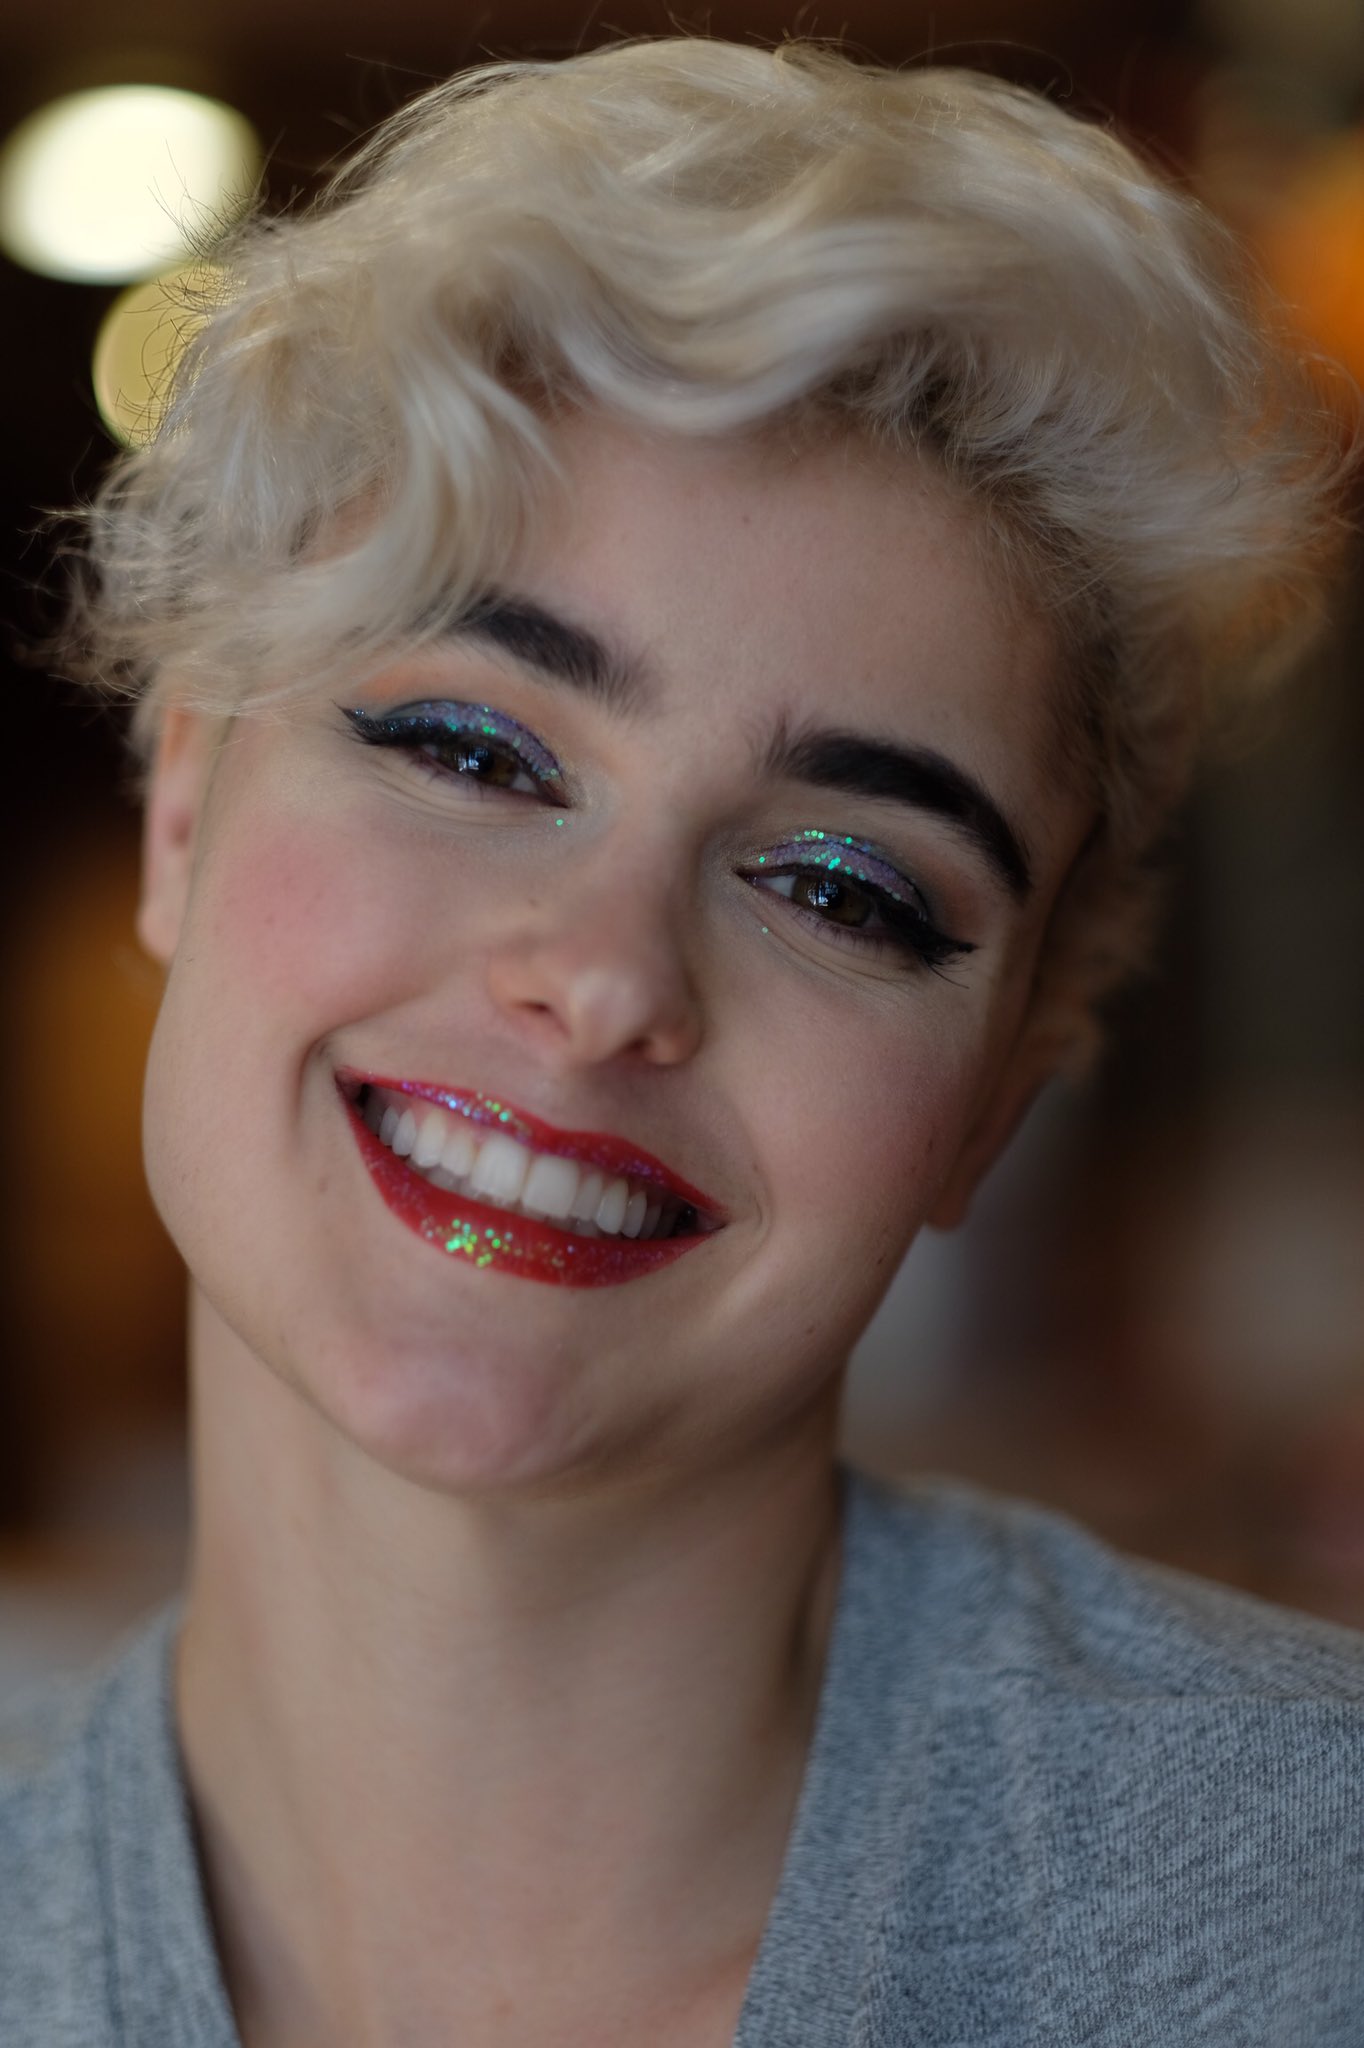 Stefania Ferrario on Twitter: "Today's makeup by #mishajay  https://t.co/2mANe8Ra6a" / X